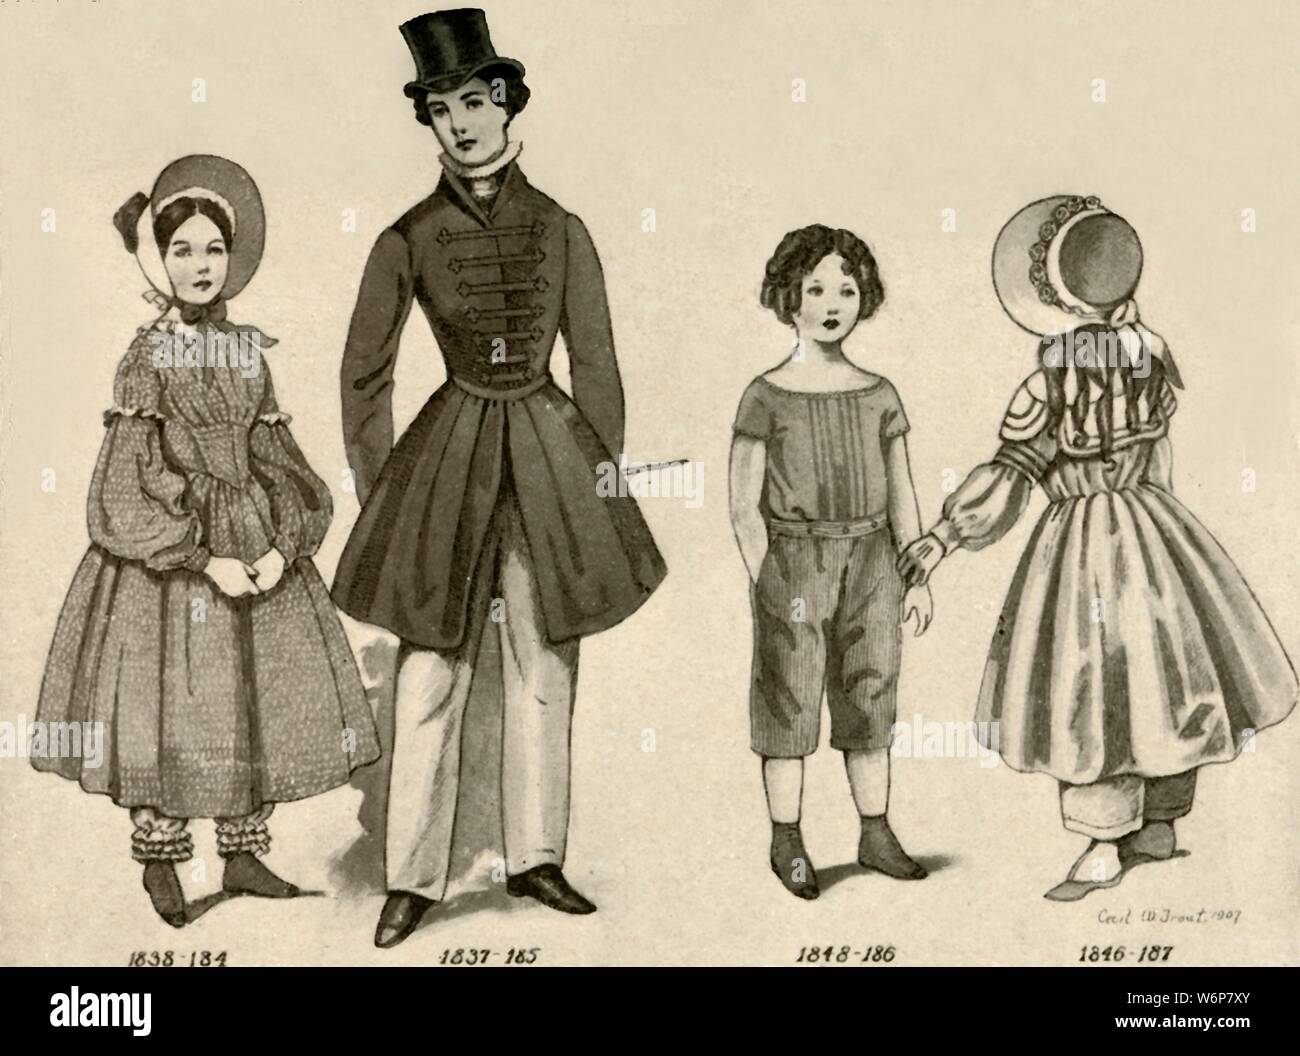 'Children's clothing from 1830-1850', 1907, (1937). From &quot;History of American Costume - Book One 1607-1800&quot;, by Elisabeth McClellan. [Tudor Publishing Company, New York, 1937] Stock Photo